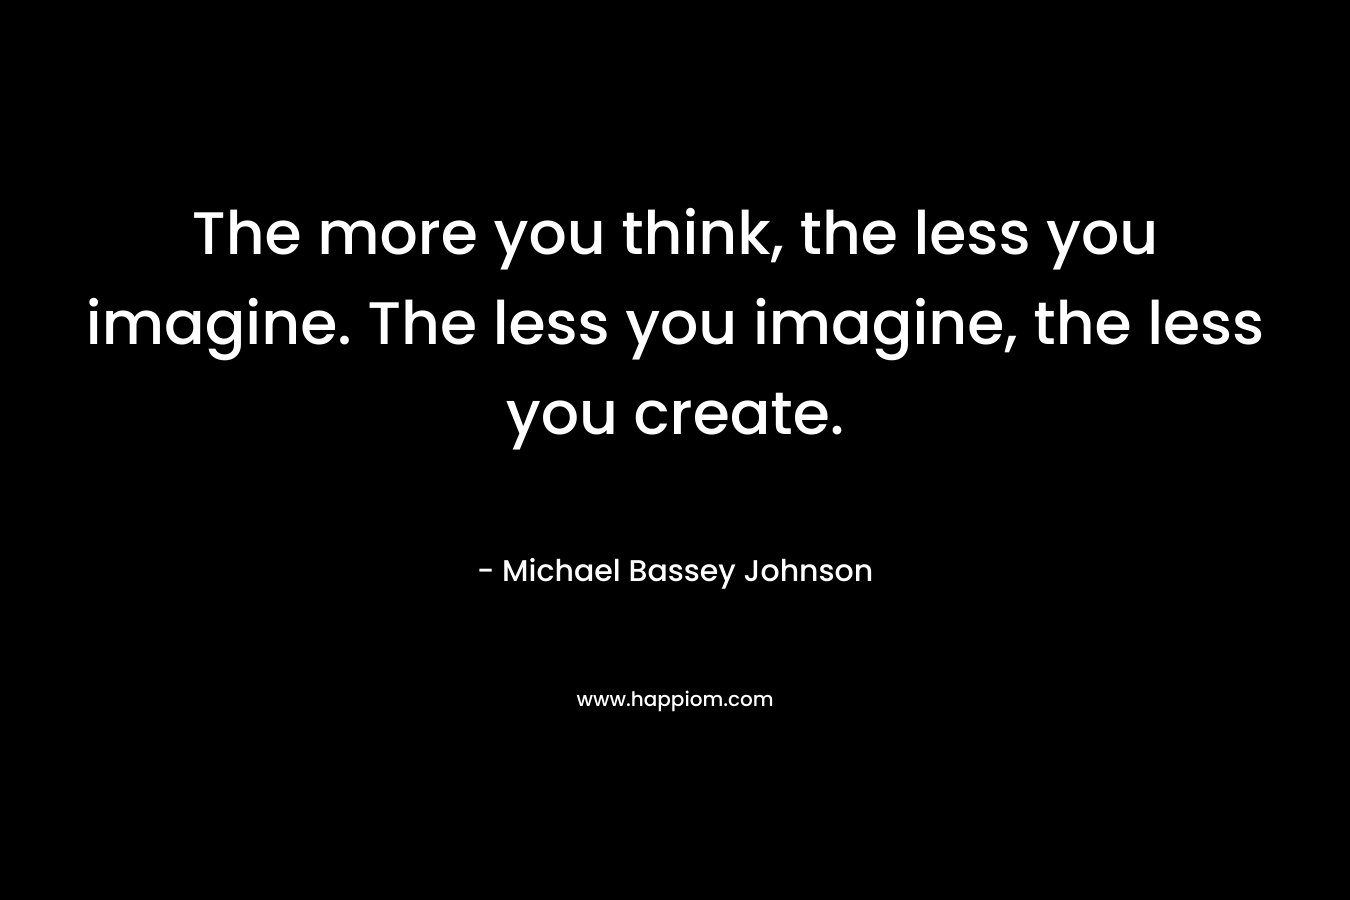 The more you think, the less you imagine. The less you imagine, the less you create.